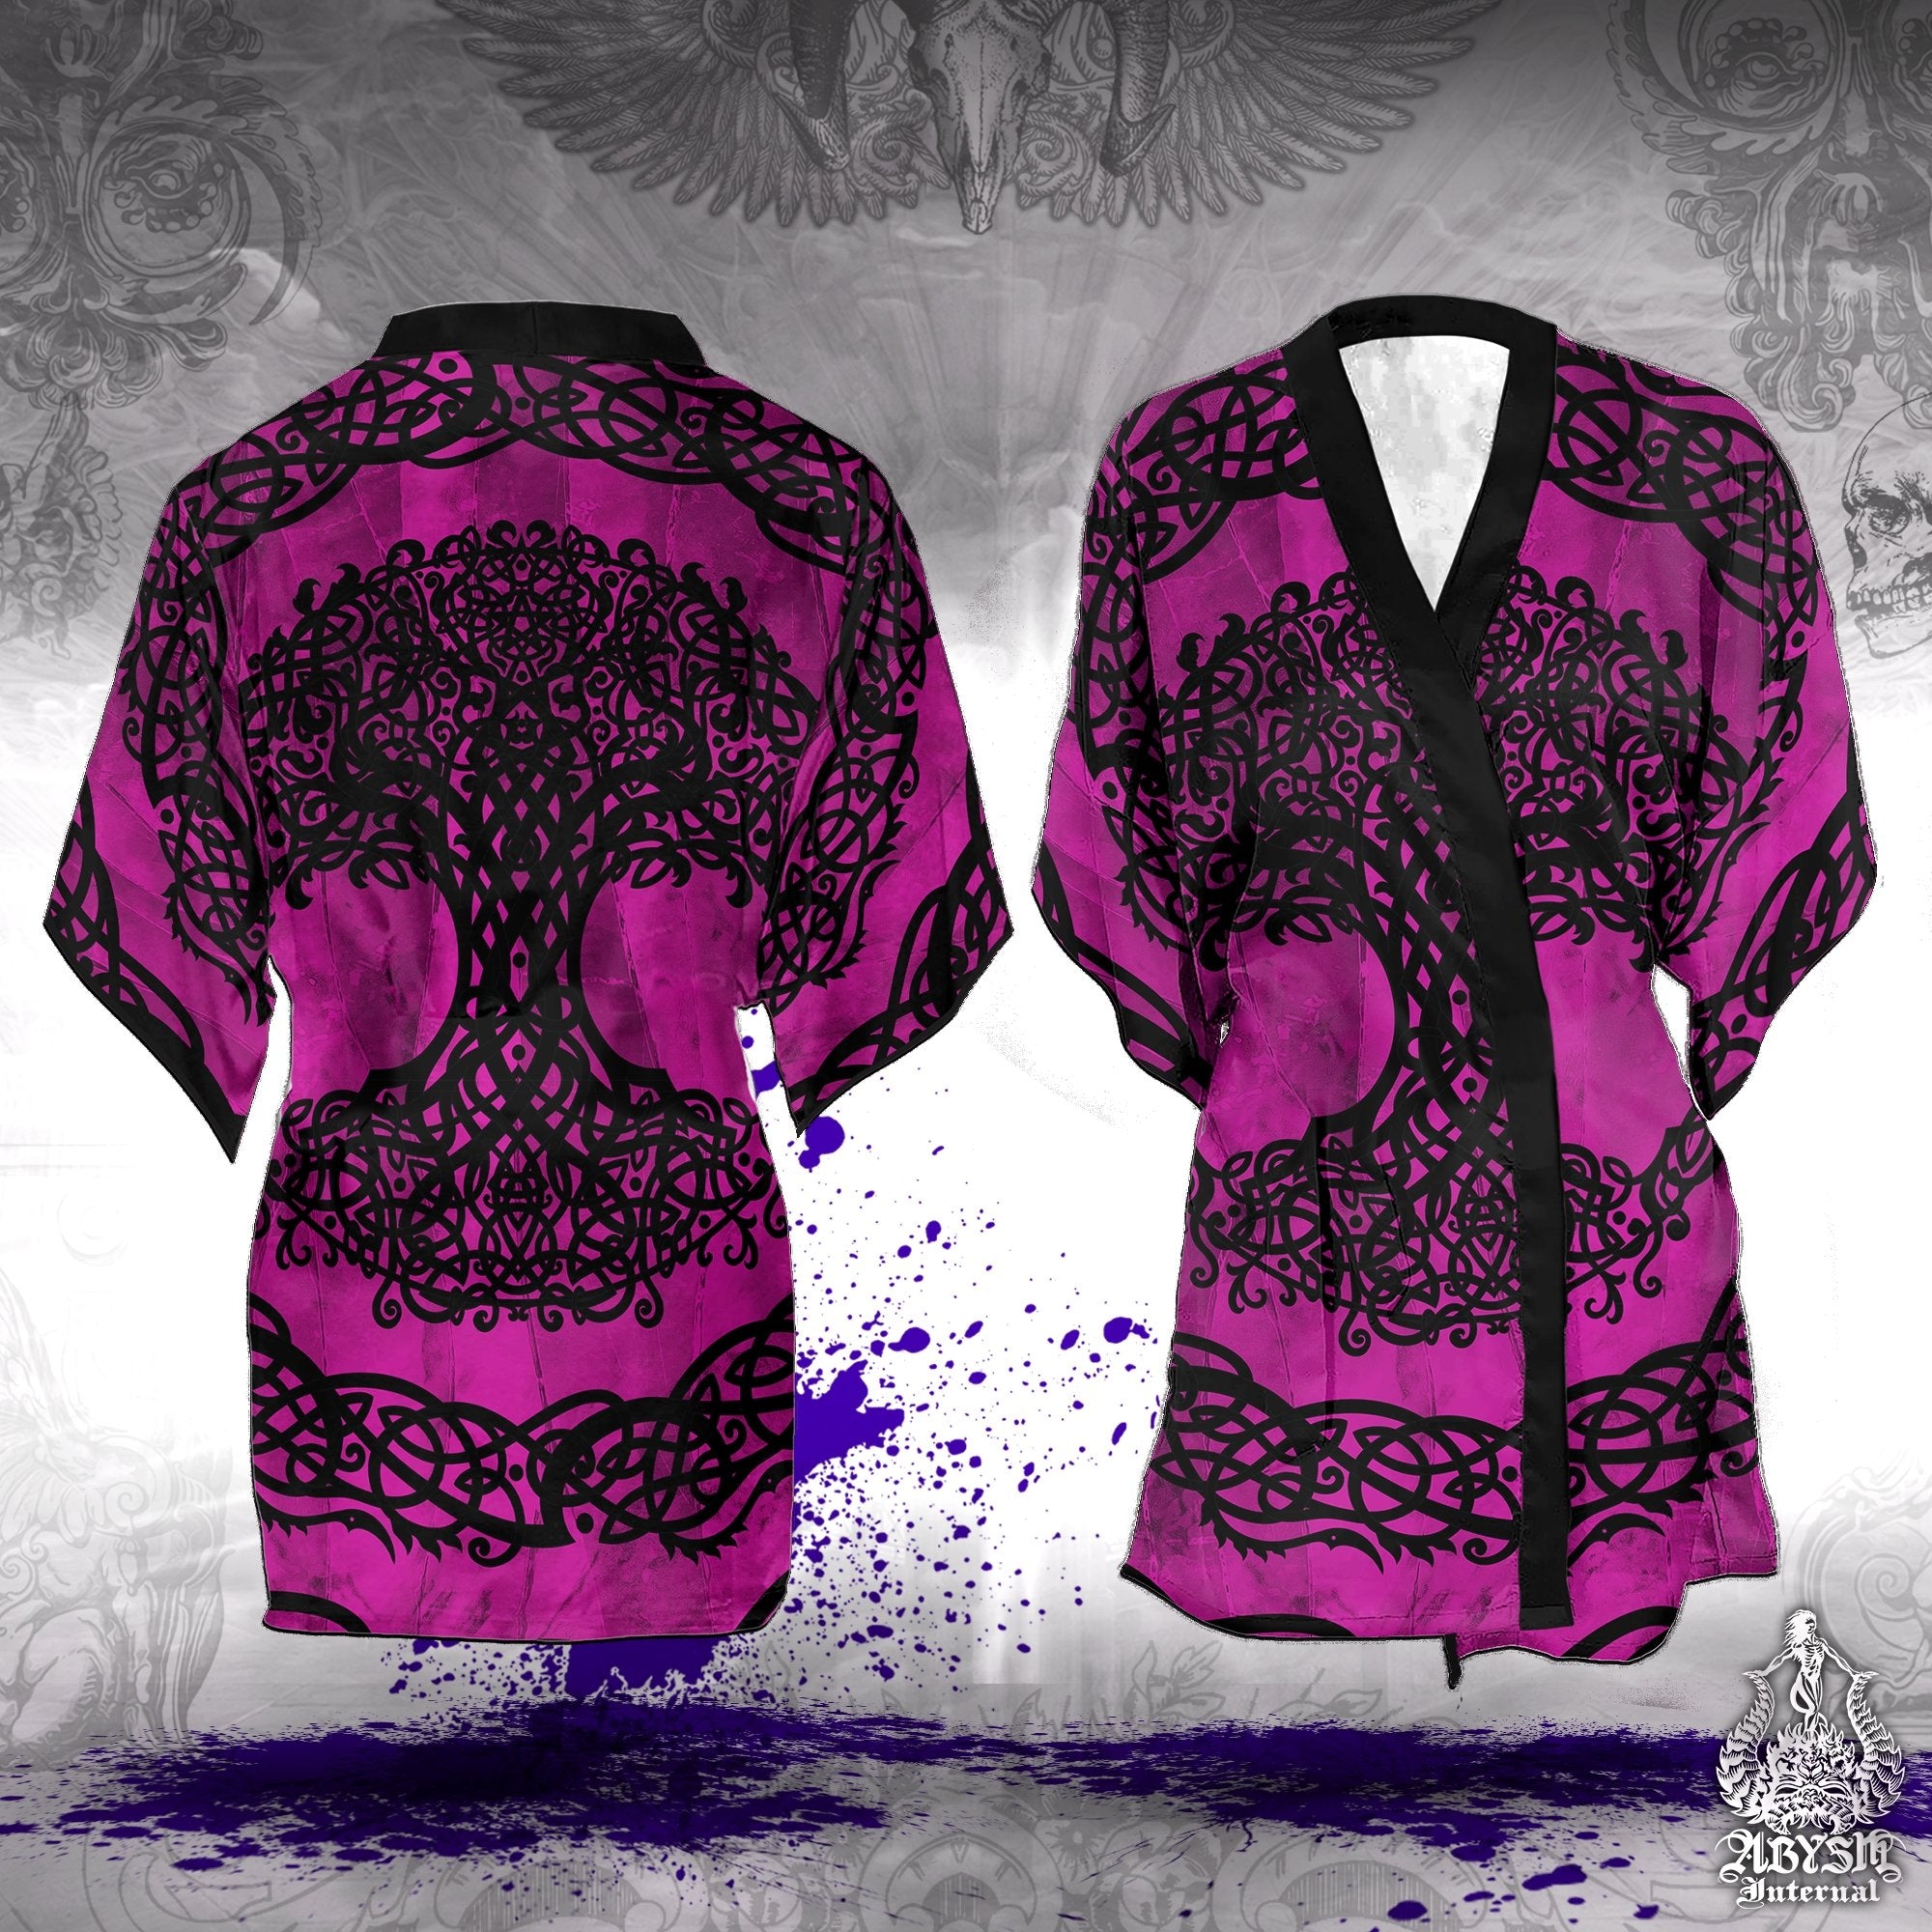 Witchy Cover Up, Beach Outfit, Celtic Party Kimono, Wicca Summer Festival Robe, Indie Tree of Life, Alternative Clothing, Unisex - Pink and Black - Abysm Internal